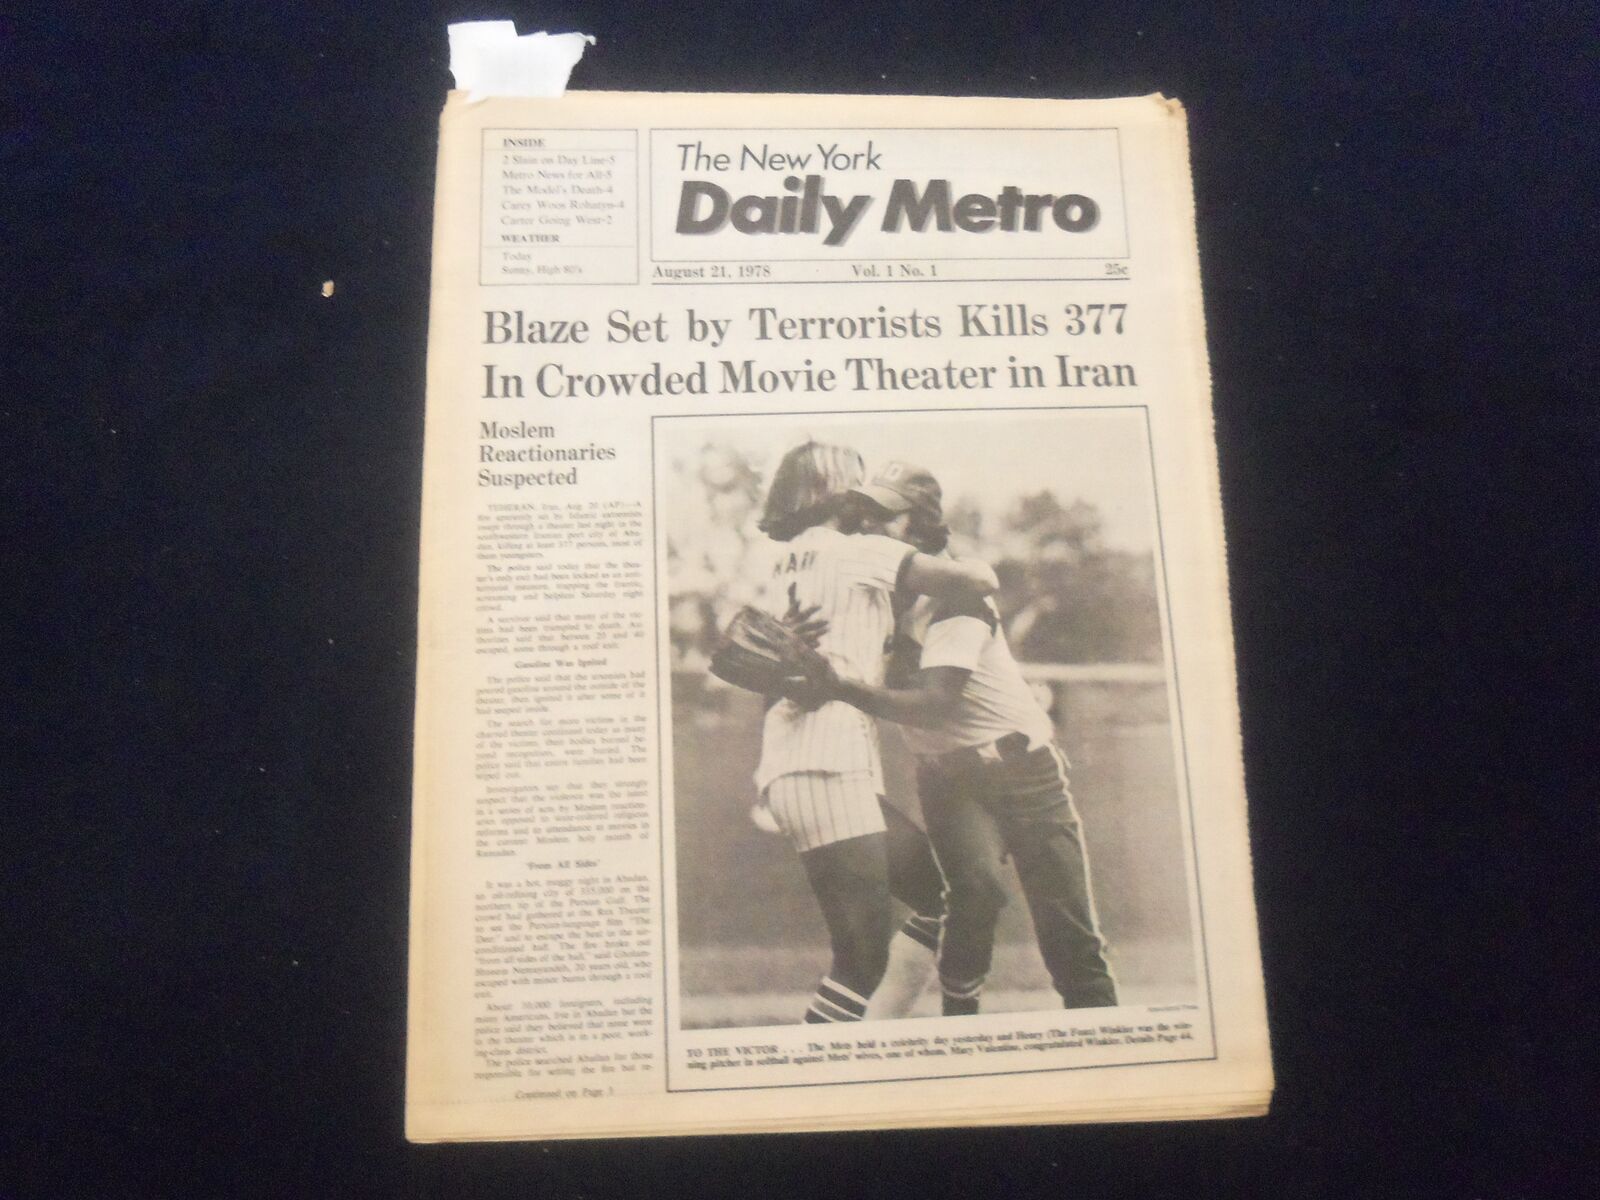 1978 AUGUST 21 THE NEW YORK DAILY METRO NEWSPAPER - VOL. 1, NO. 1 - NP 6093